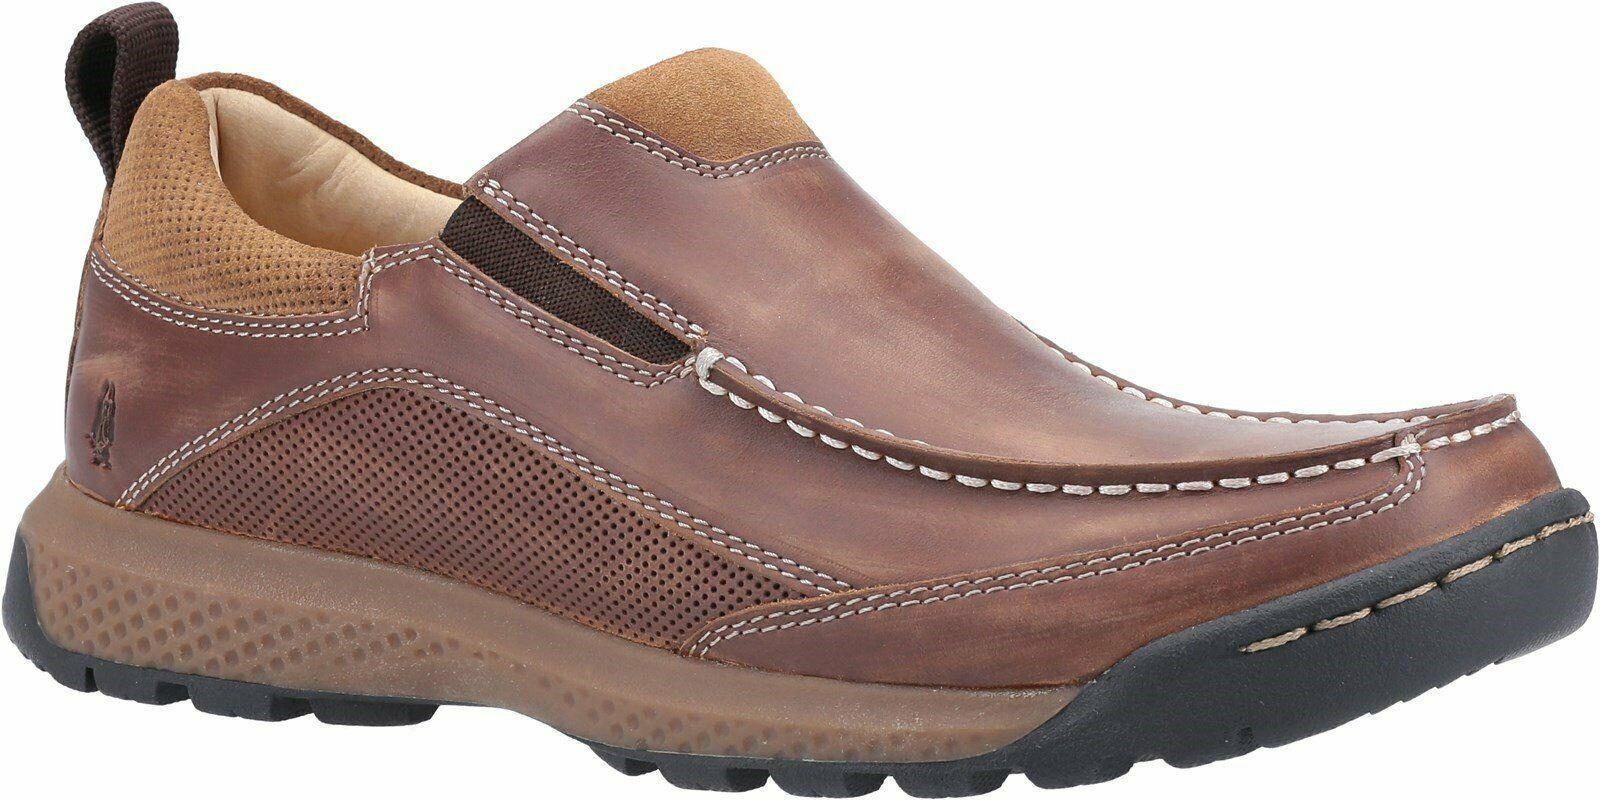 Hush Puppies Duncan brown leather memory foam slip on trainers shoes